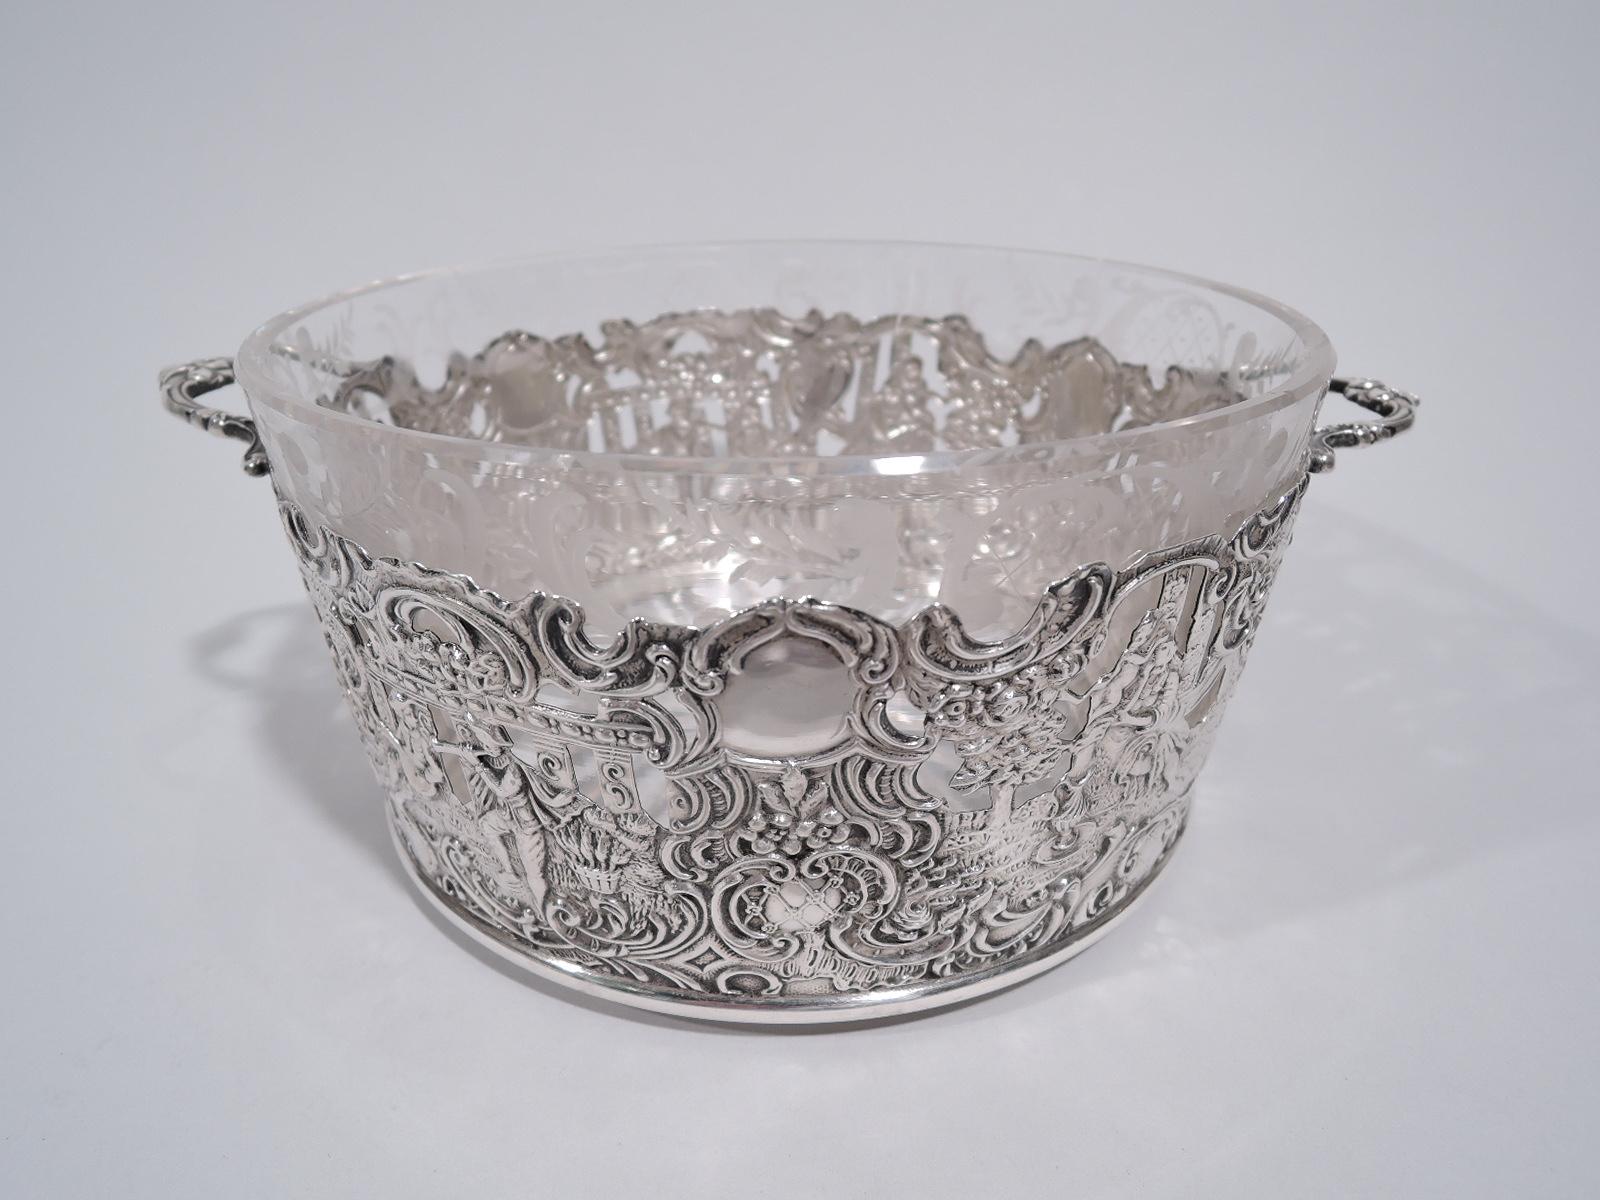 Turn-of-the-century American sterling silver ice bucket. Round with fixed scroll-handles mounted to rim. Pierced and repousse frieze depicting piping and strumming troubadours and recumbent females. Sweet and sentimental in the German style.